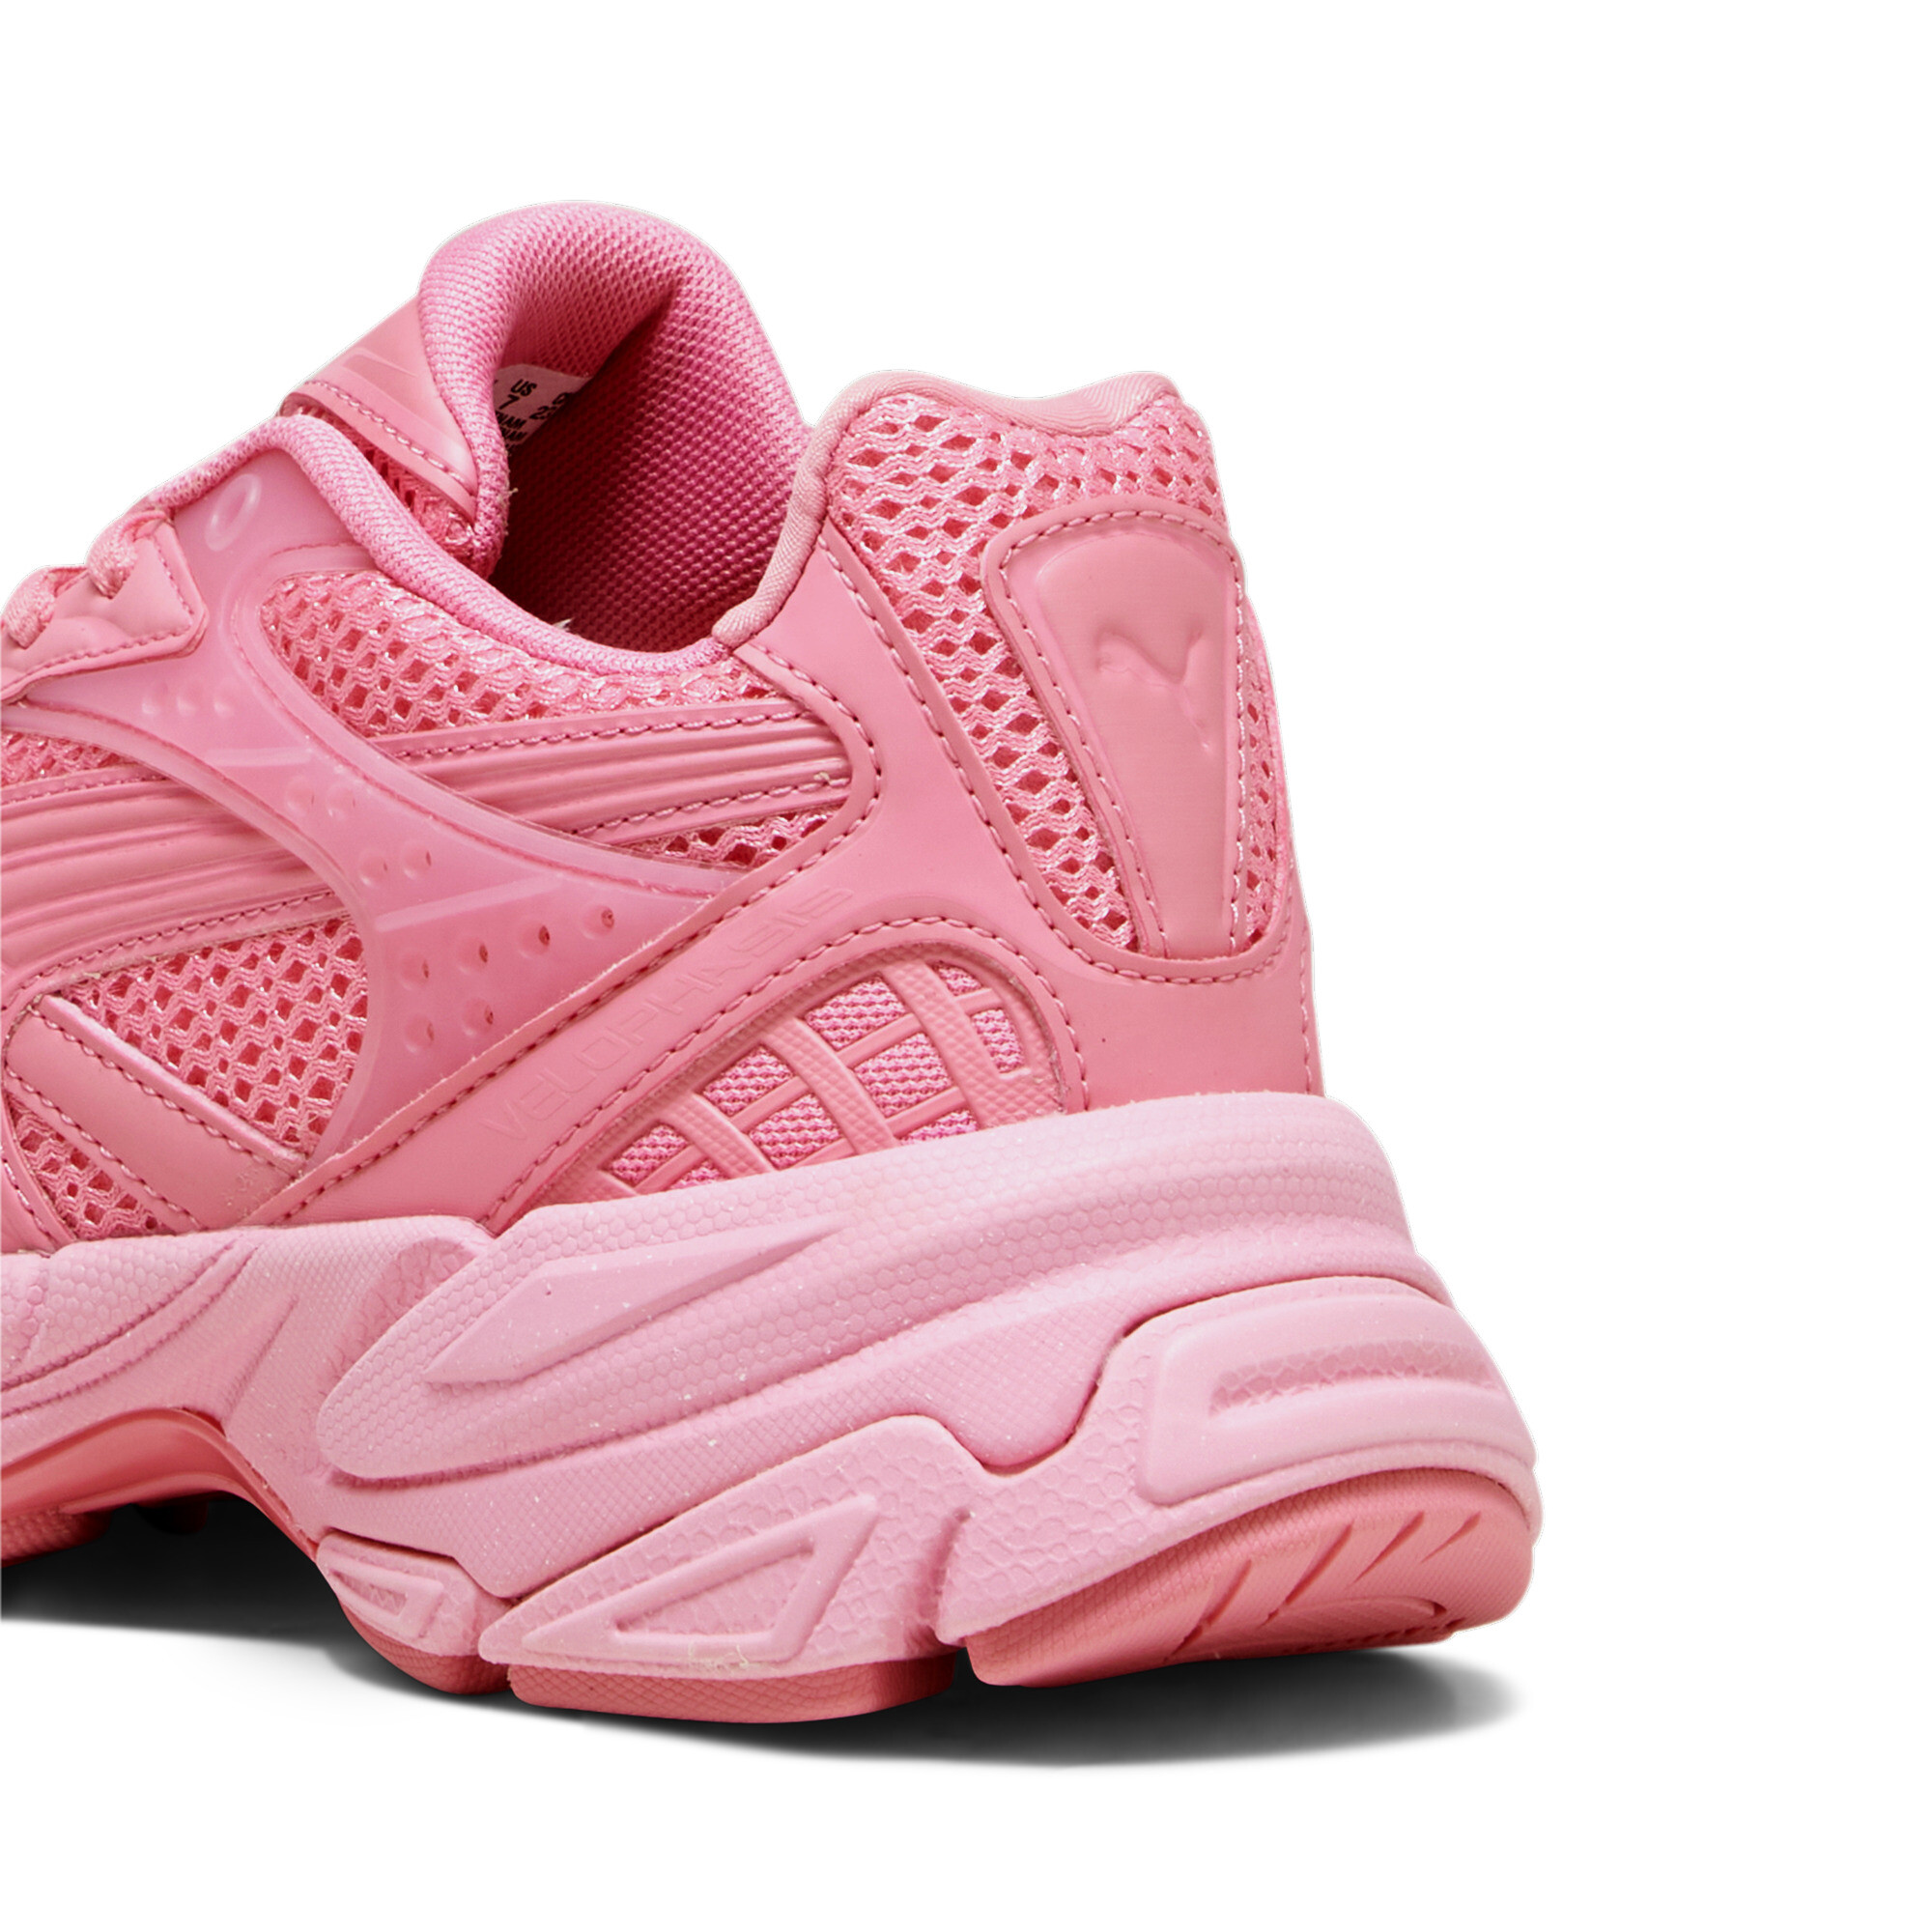 Puma Velophasis Technisch Sneakers, Pink, Size 42, Shoes